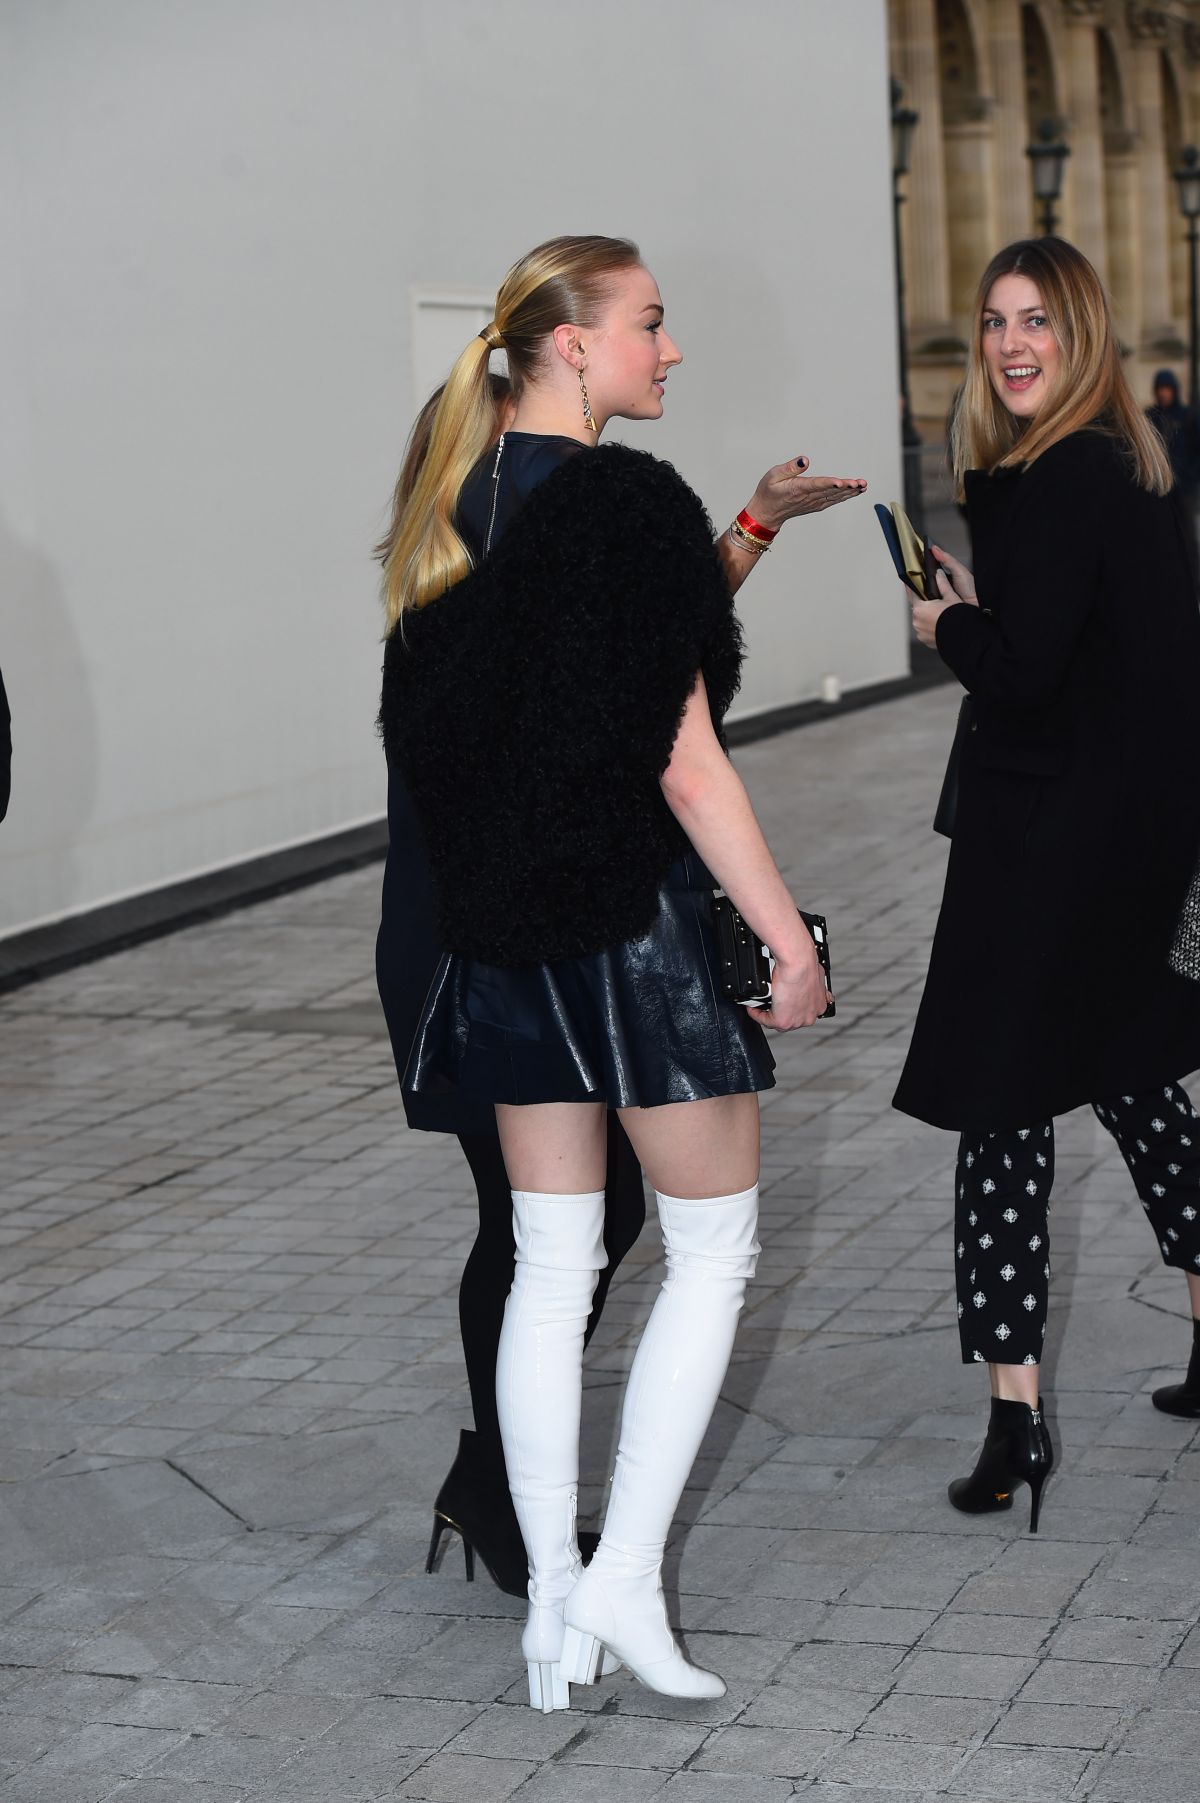 Sophie Turner Ups Her Courtside Game in Tights and Louis Vuitton